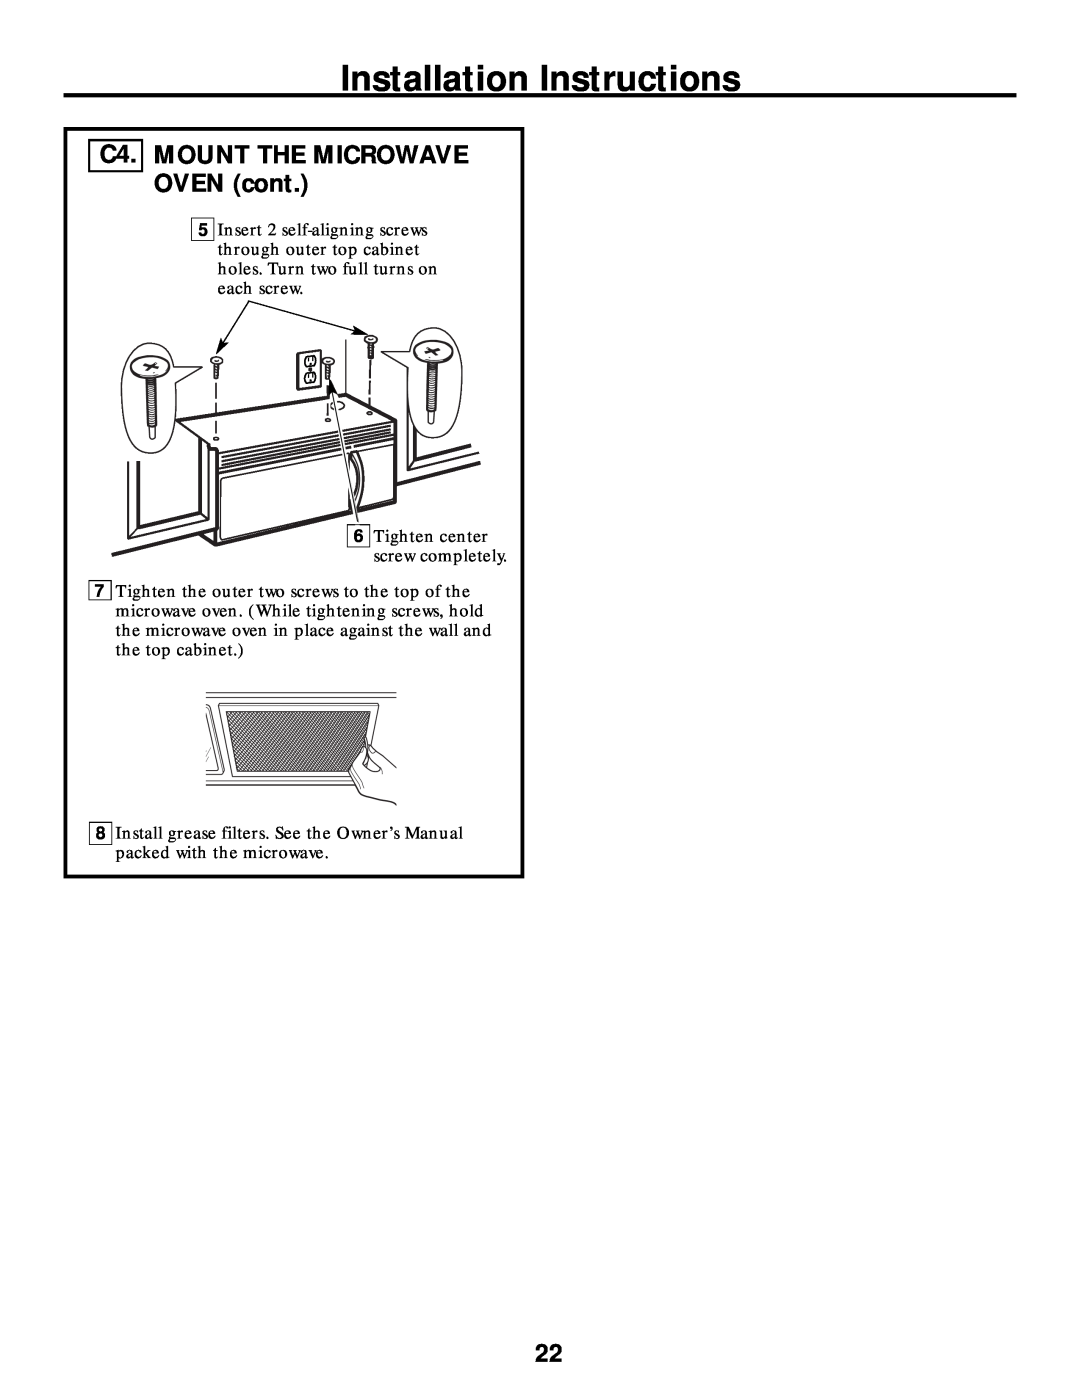 Frigidaire 316495064 warranty C4. MOUNT THE MICROWAVE OVEN cont, Installation Instructions 